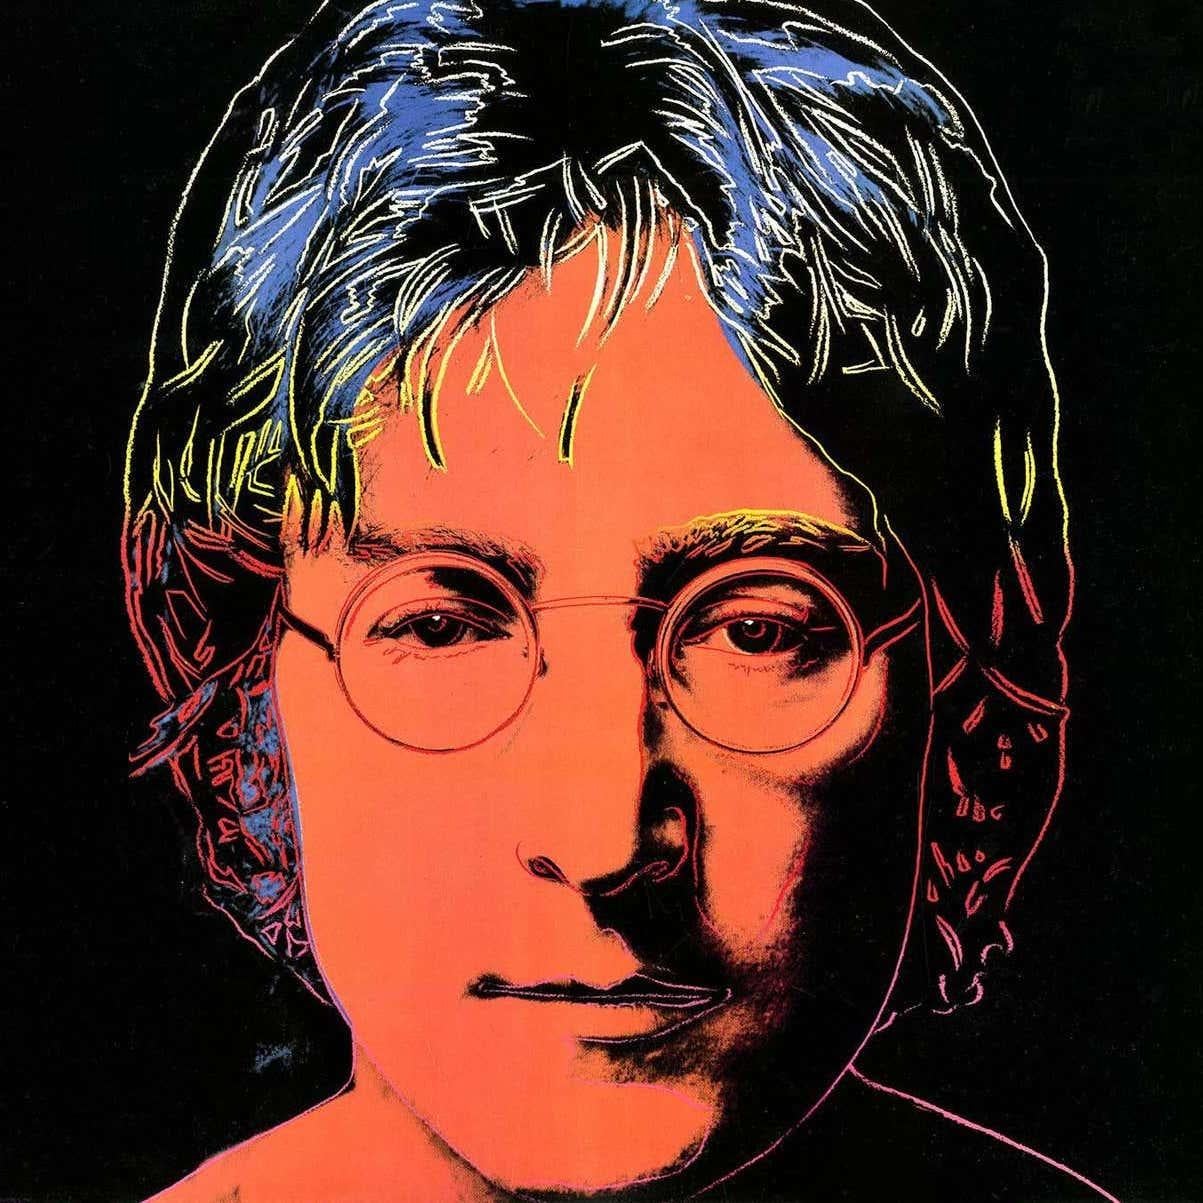 Andy Warhol, John Lennon 1986:
Rare sought-after Andy Warhol John Lennon Vinyl Record Art:
Offset illustrated by Andy Warhol shortly before his death in 1986 for the estate of John Lennon/Capital Records. A fine impression in very nice condition.